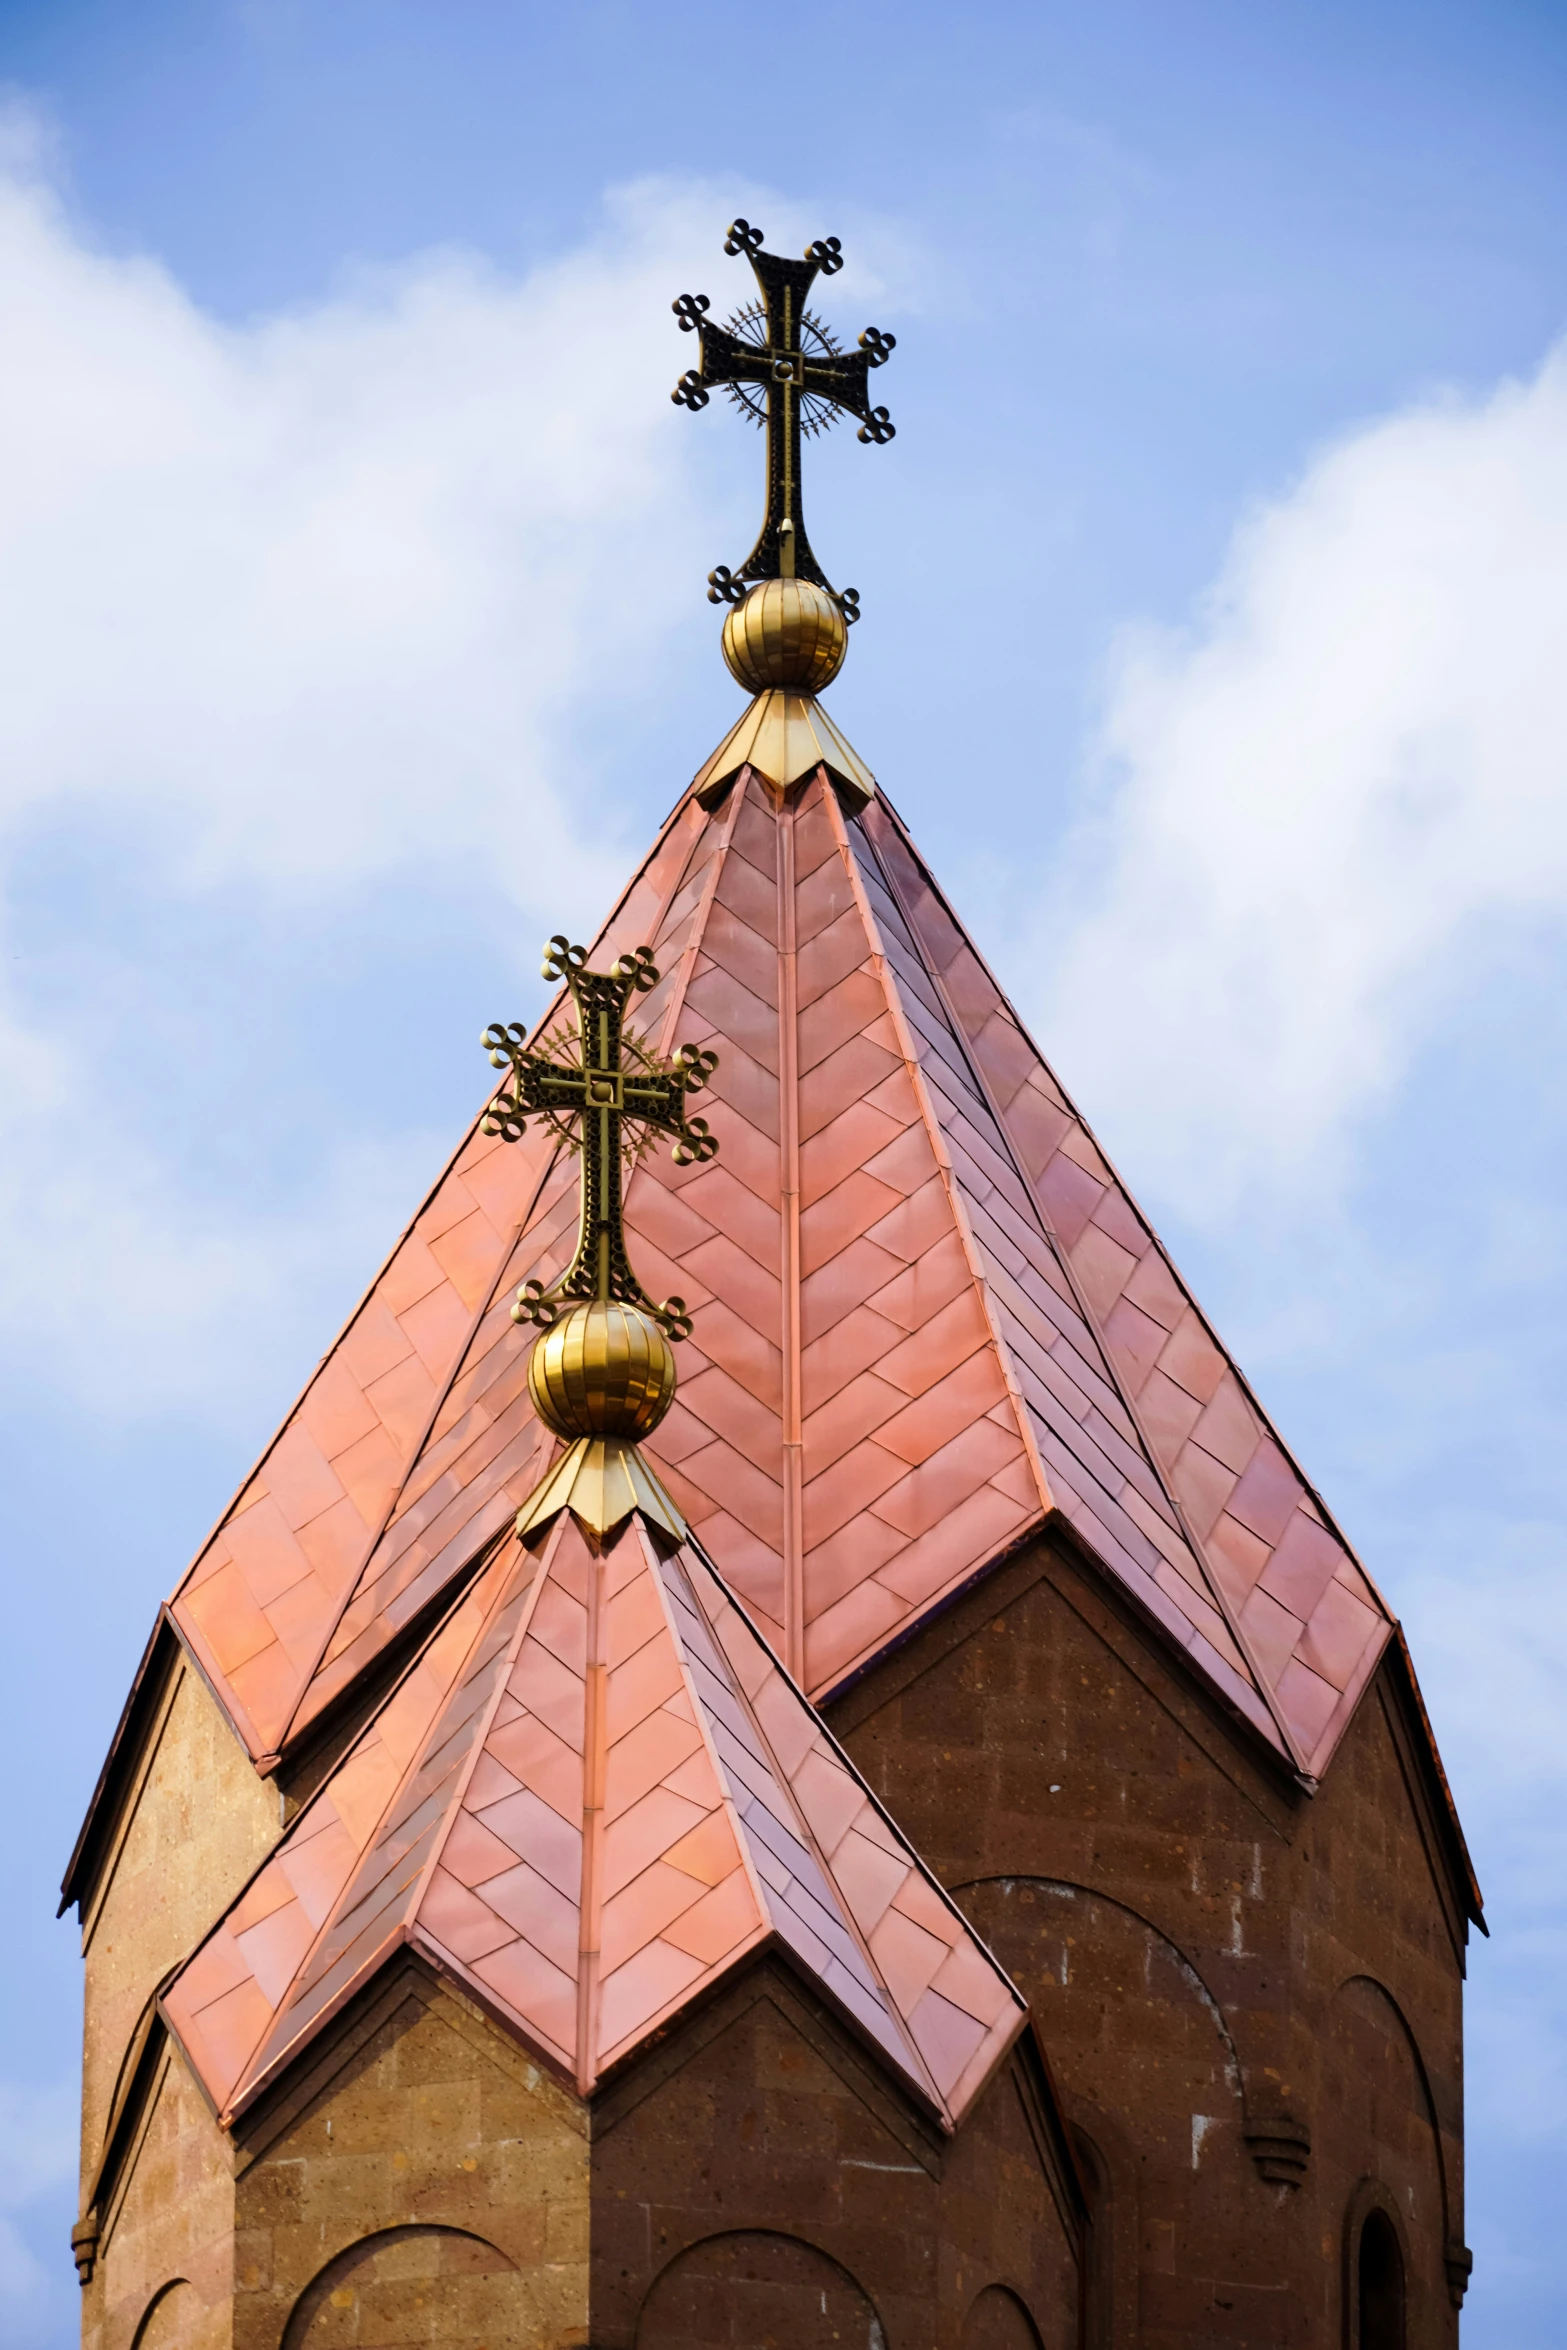 the tops of two towers are decorated with ornate decorations